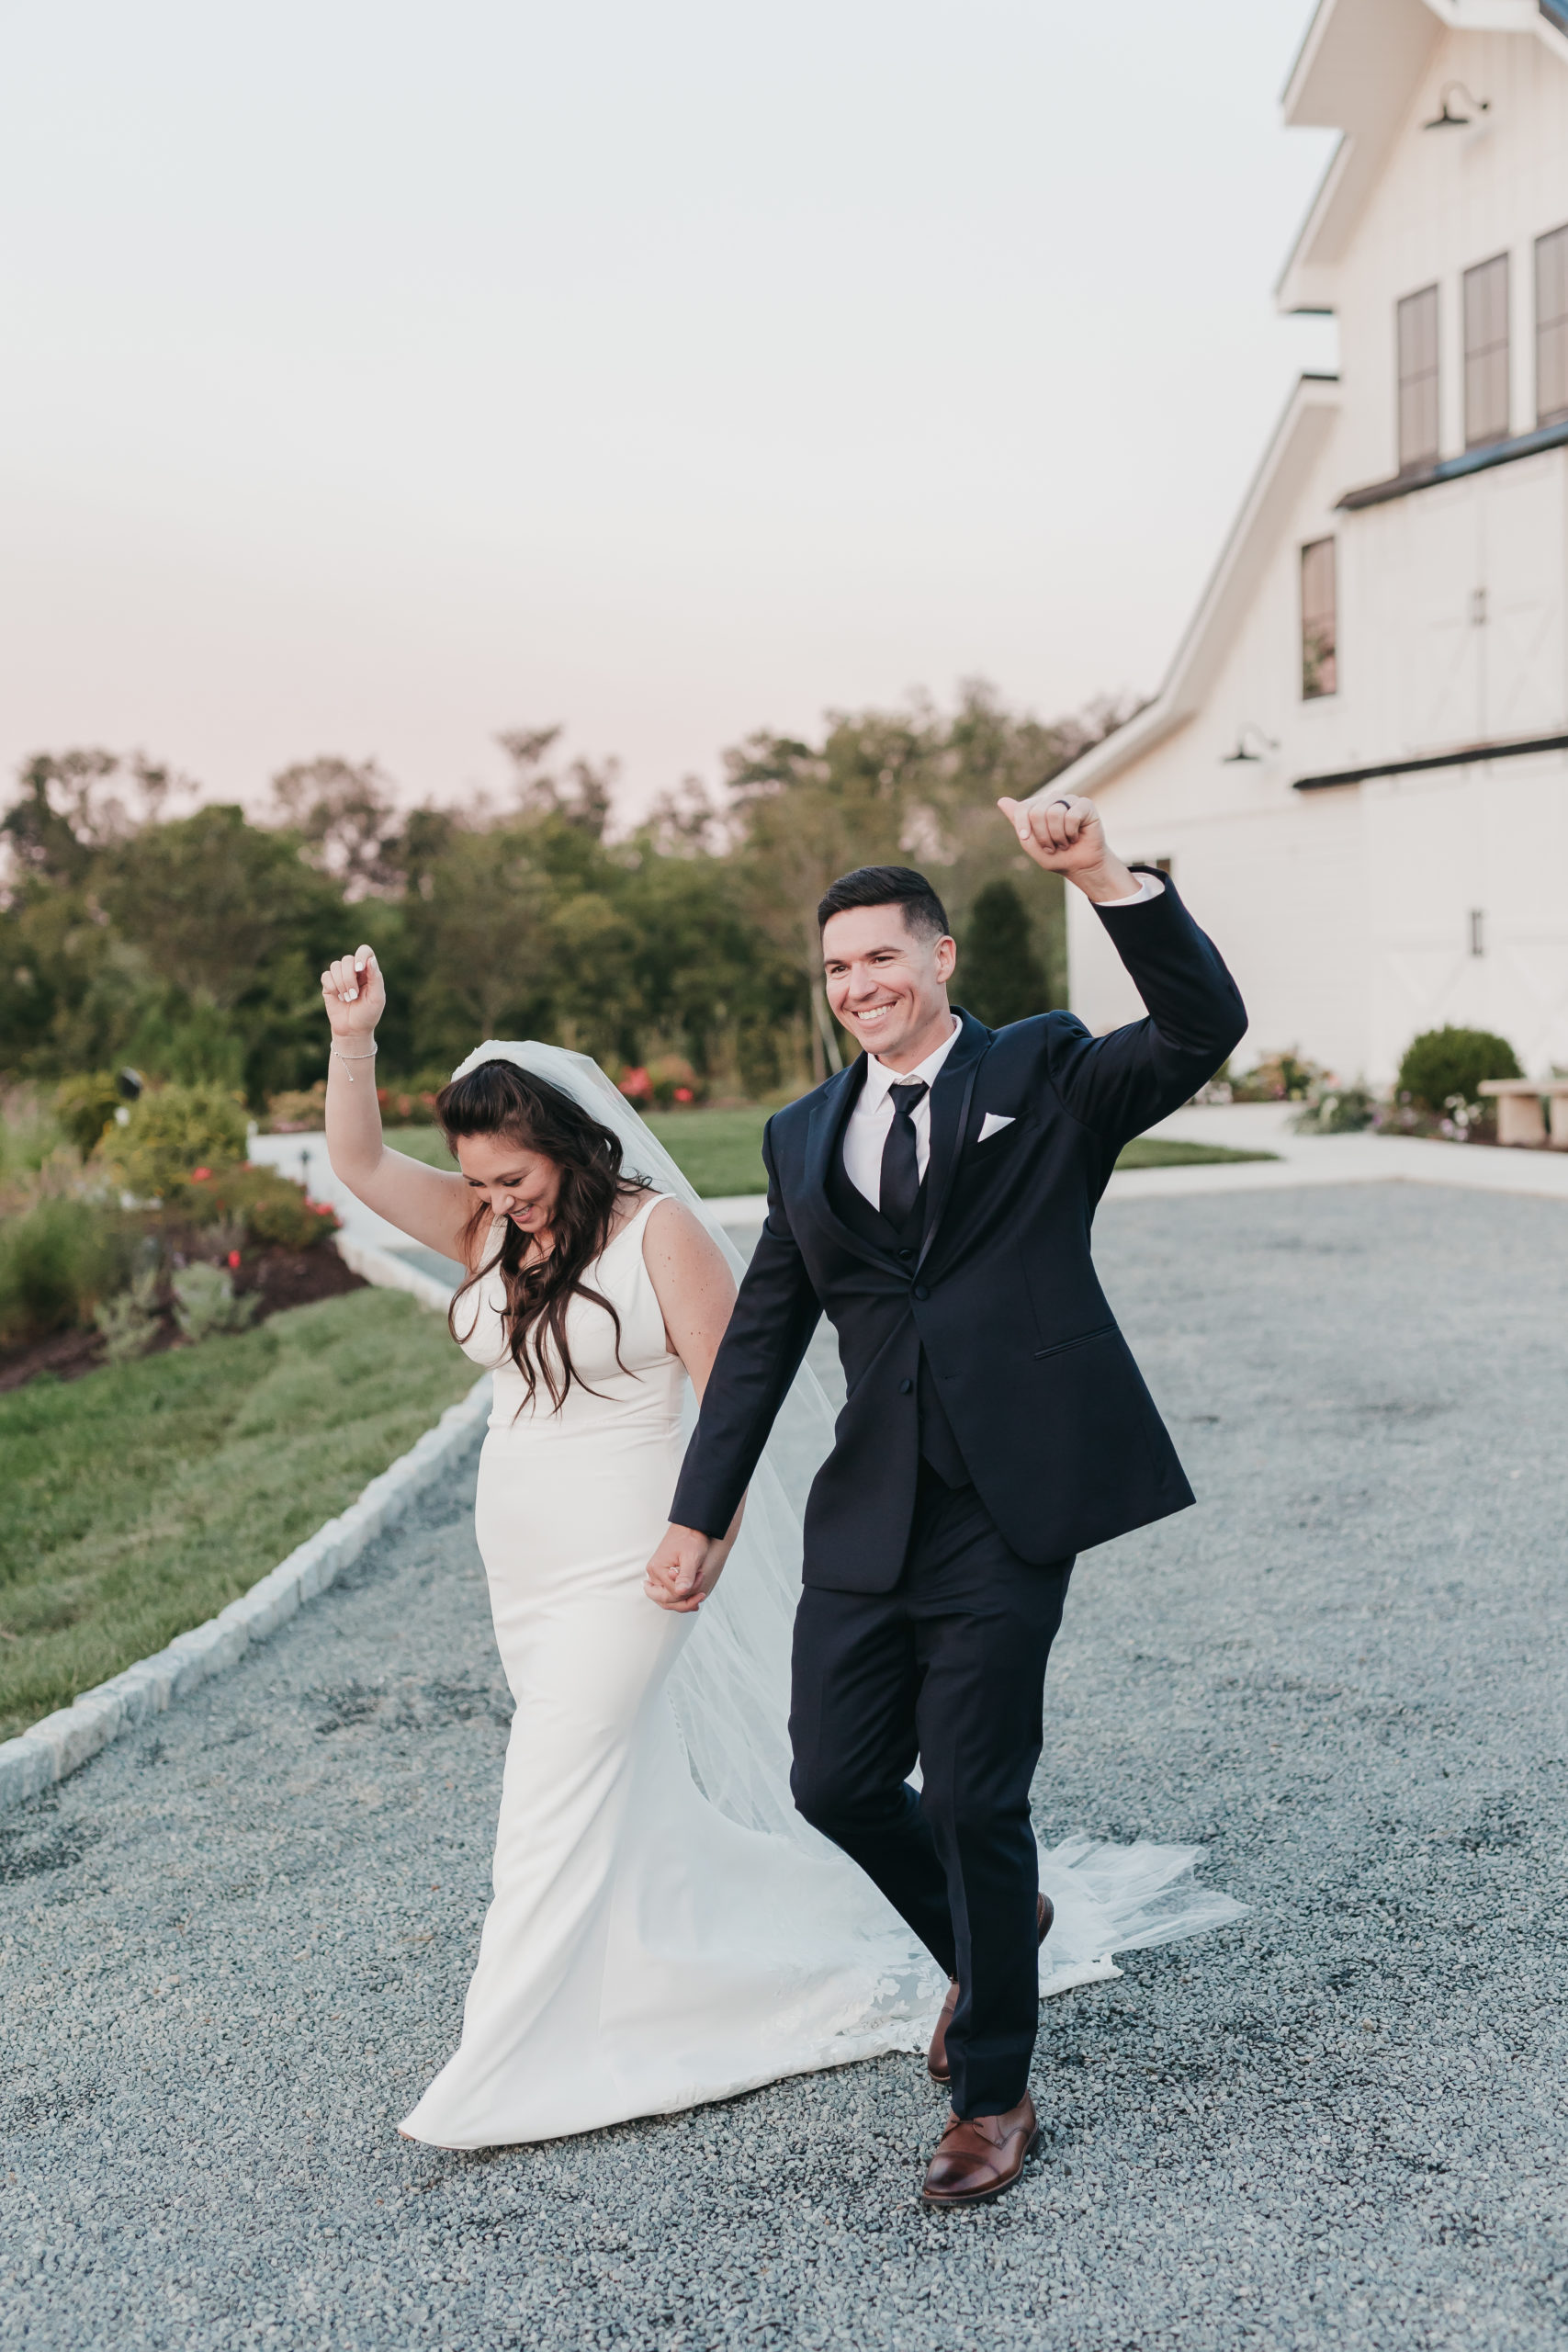 Bride and groom raising their hands as they walk and smile around the venue, taken by VA wedding photographer Rachel Yearick